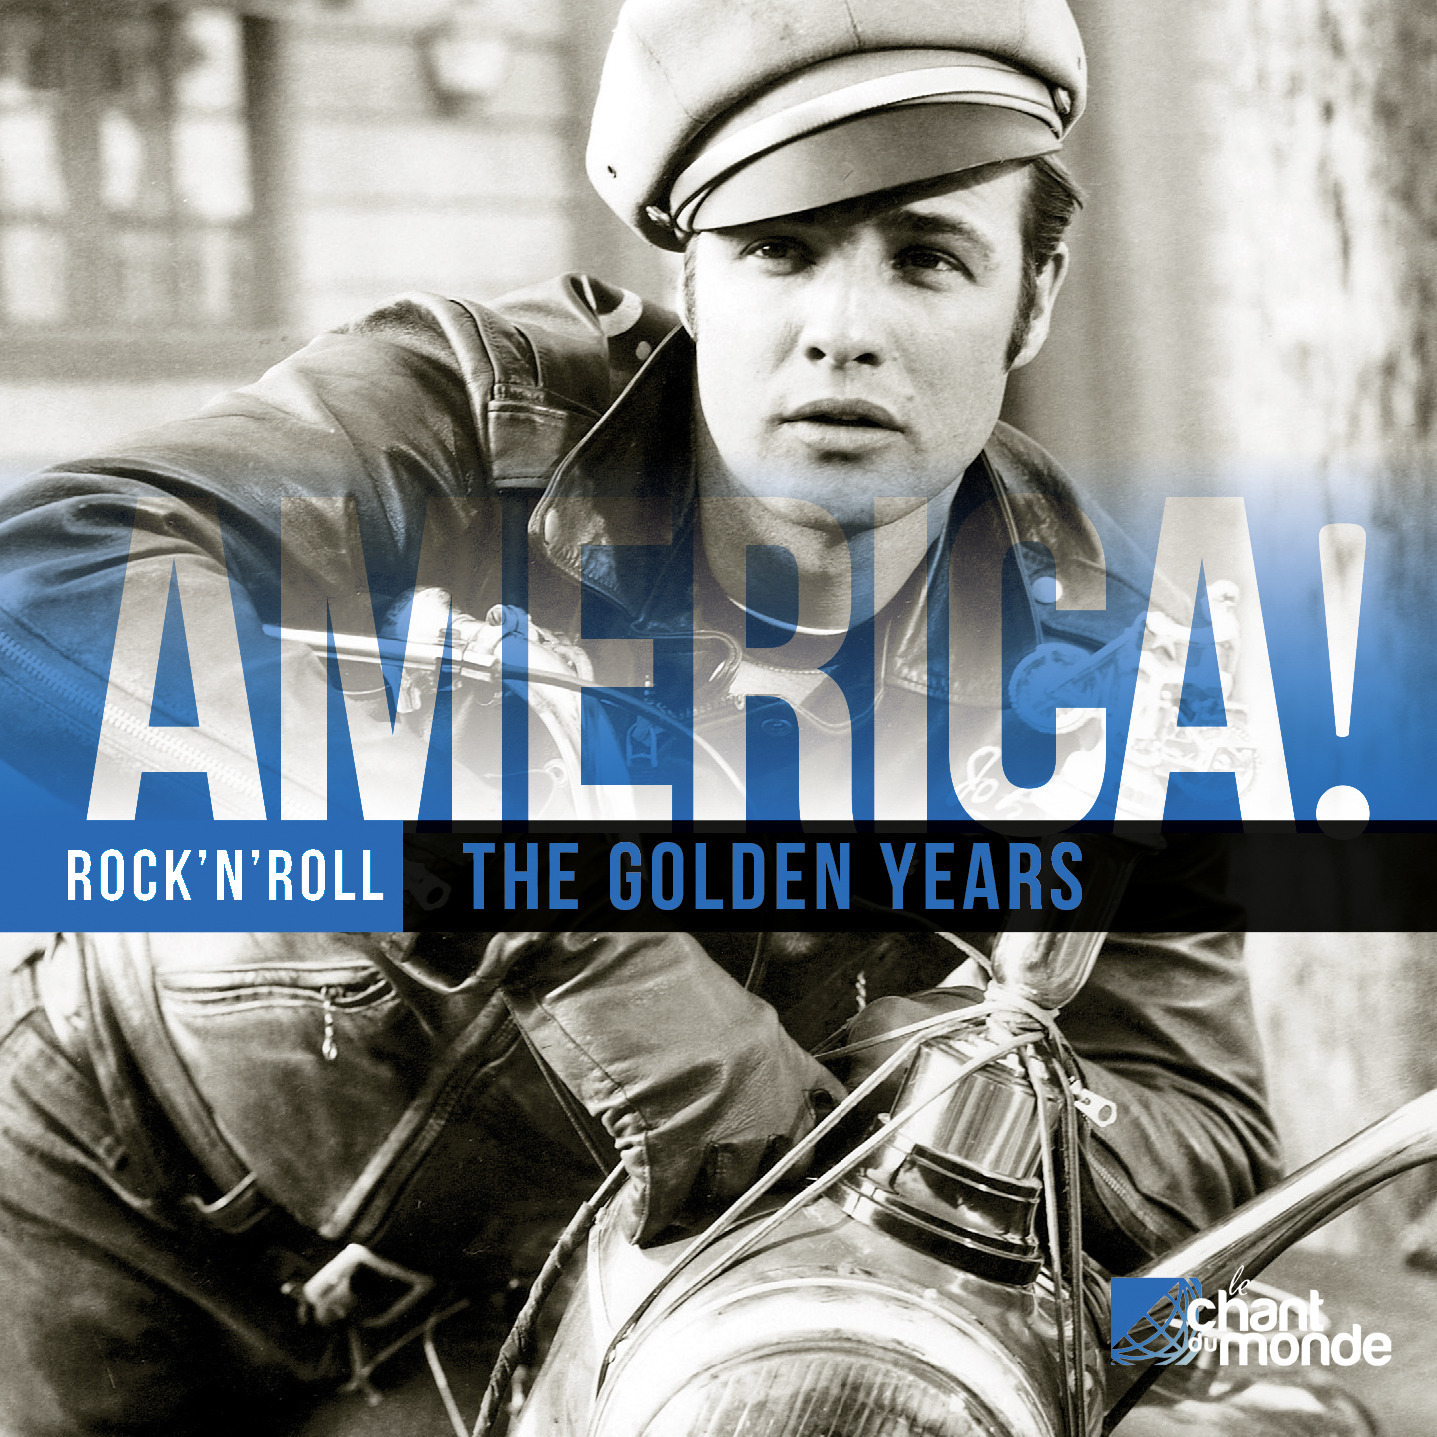 America, Vol. 11: Rock 'n' Roll - The Golden Years